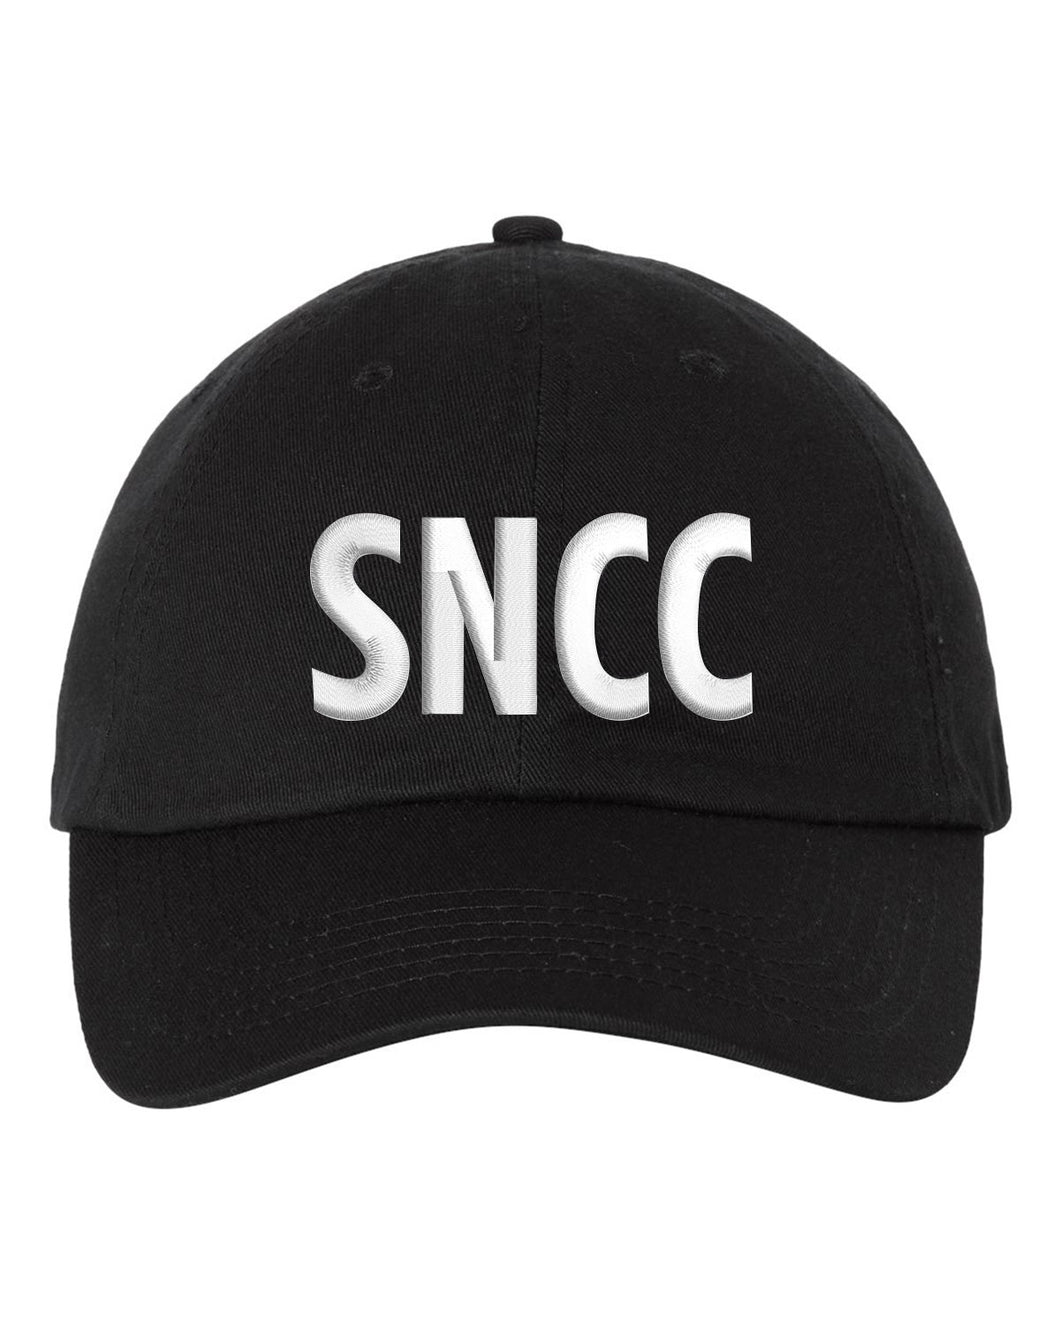 SNCC White on Black Embroidered Hat